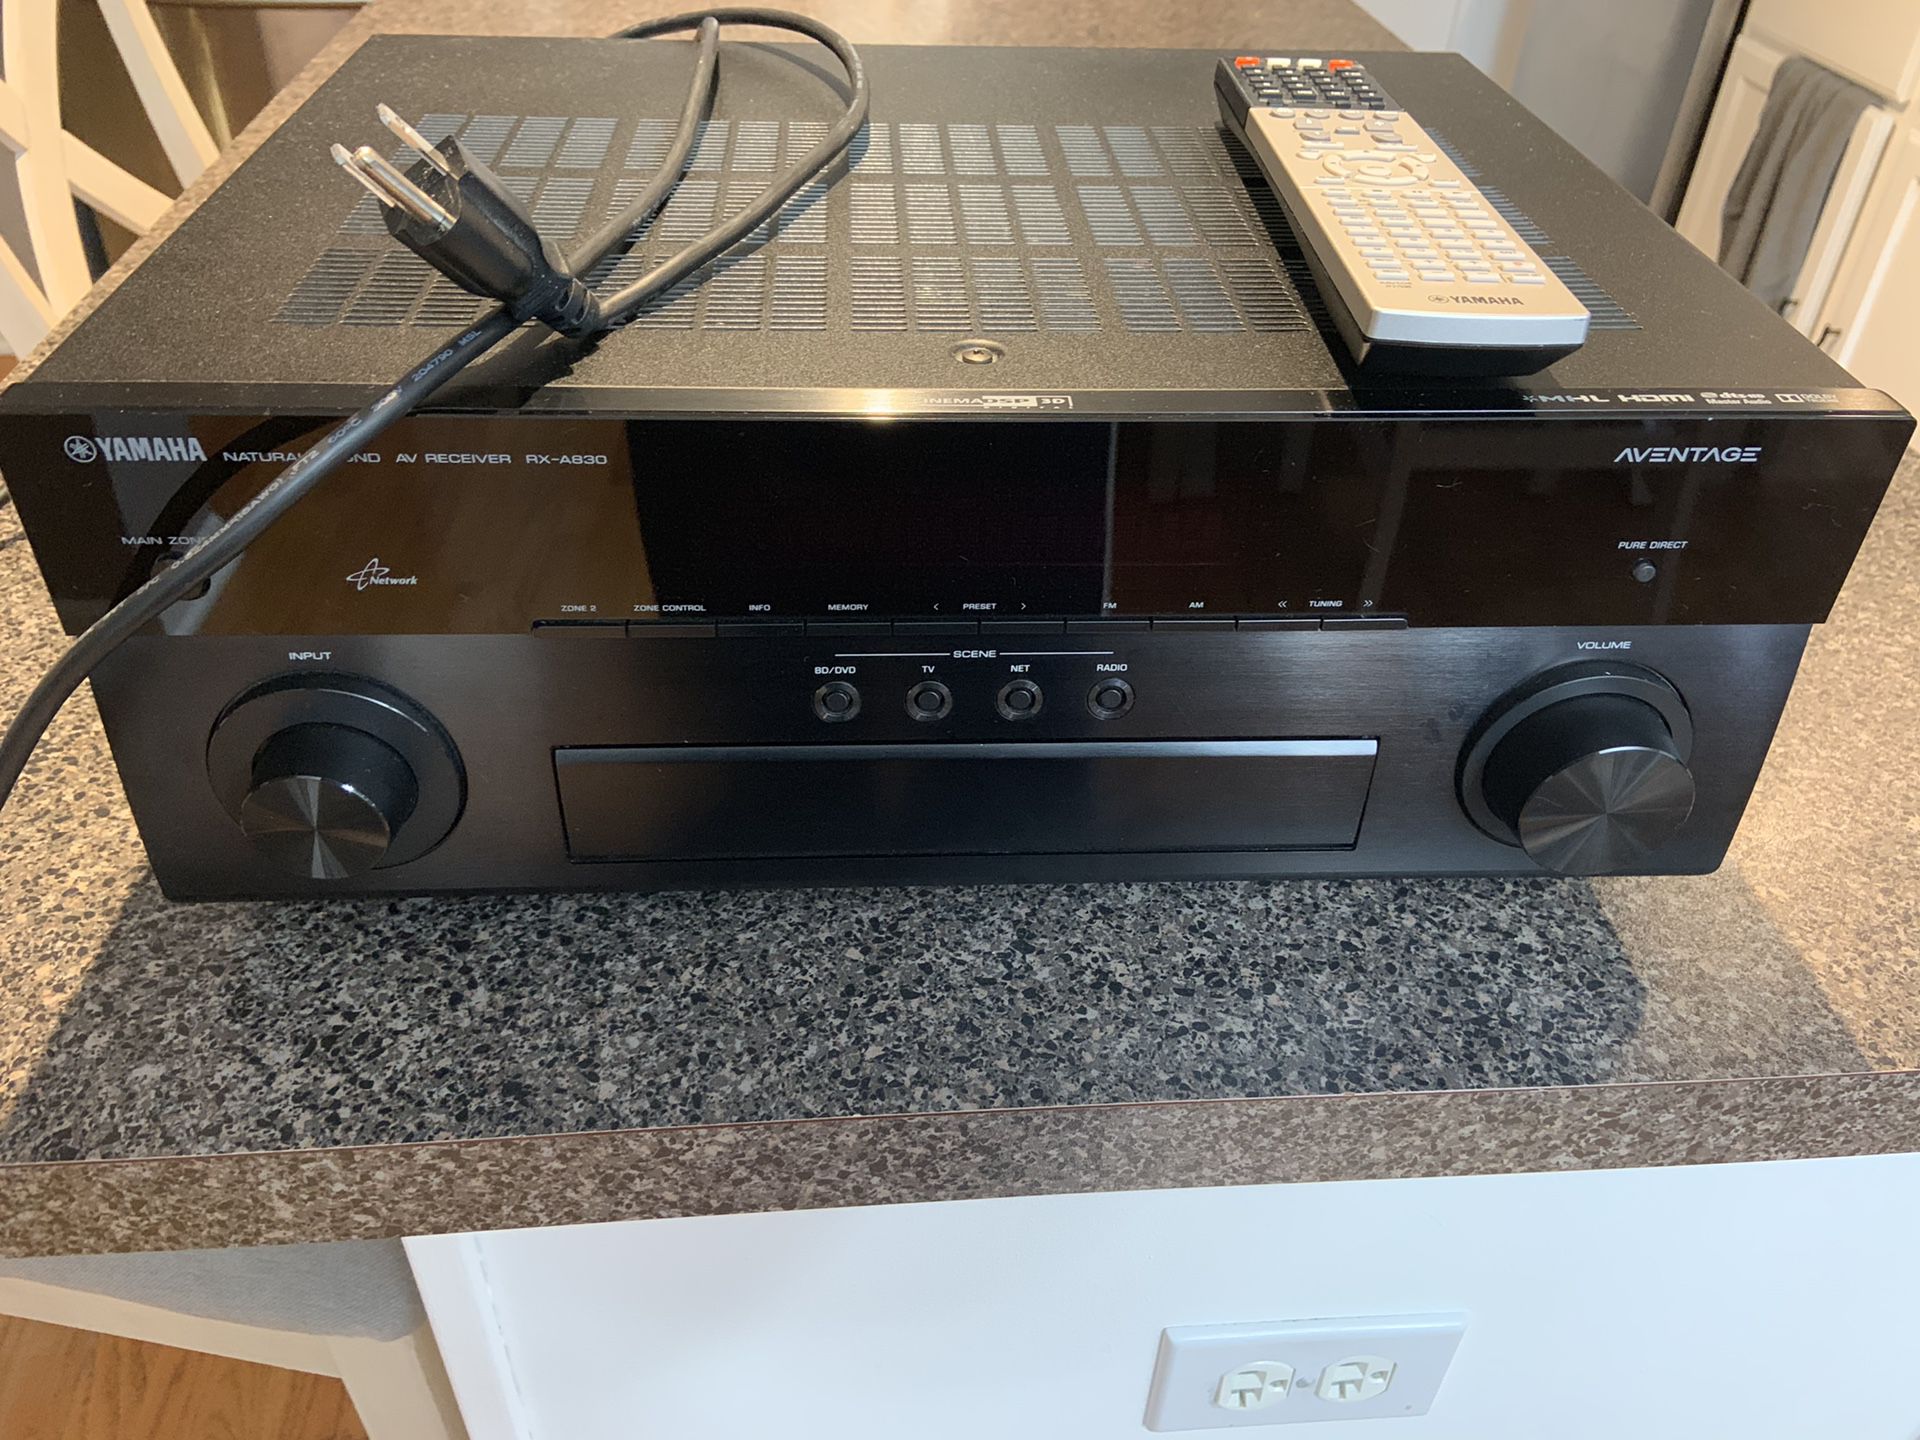 Yamaha Aventage receiver RX-A830